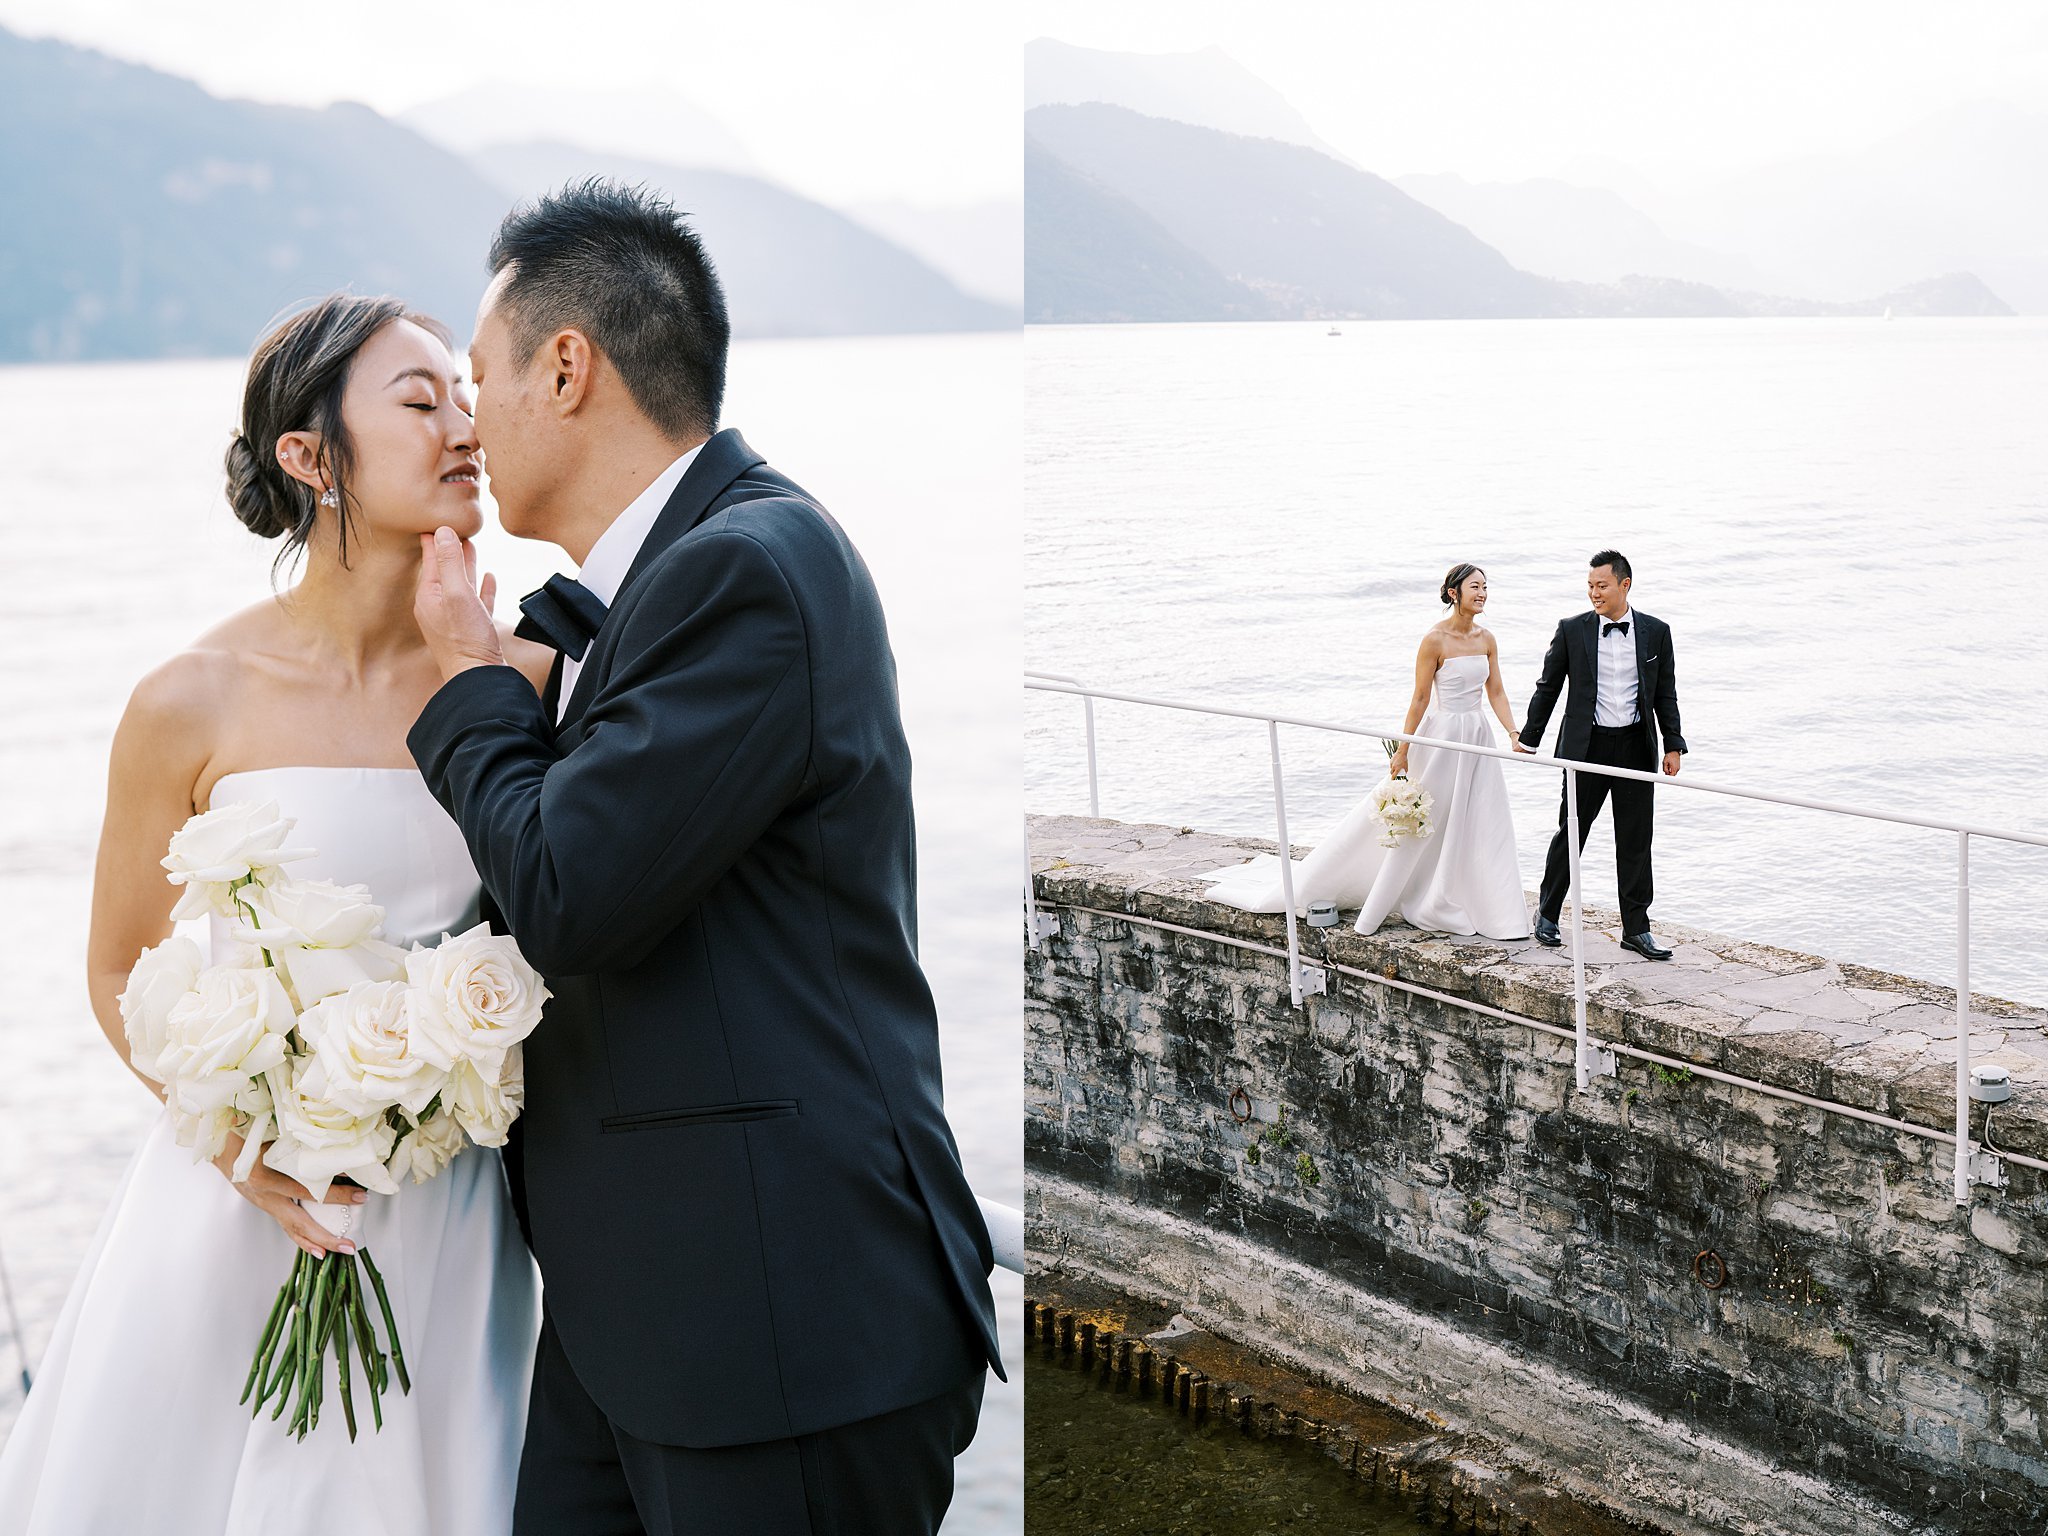 Bright and candid wedding photography